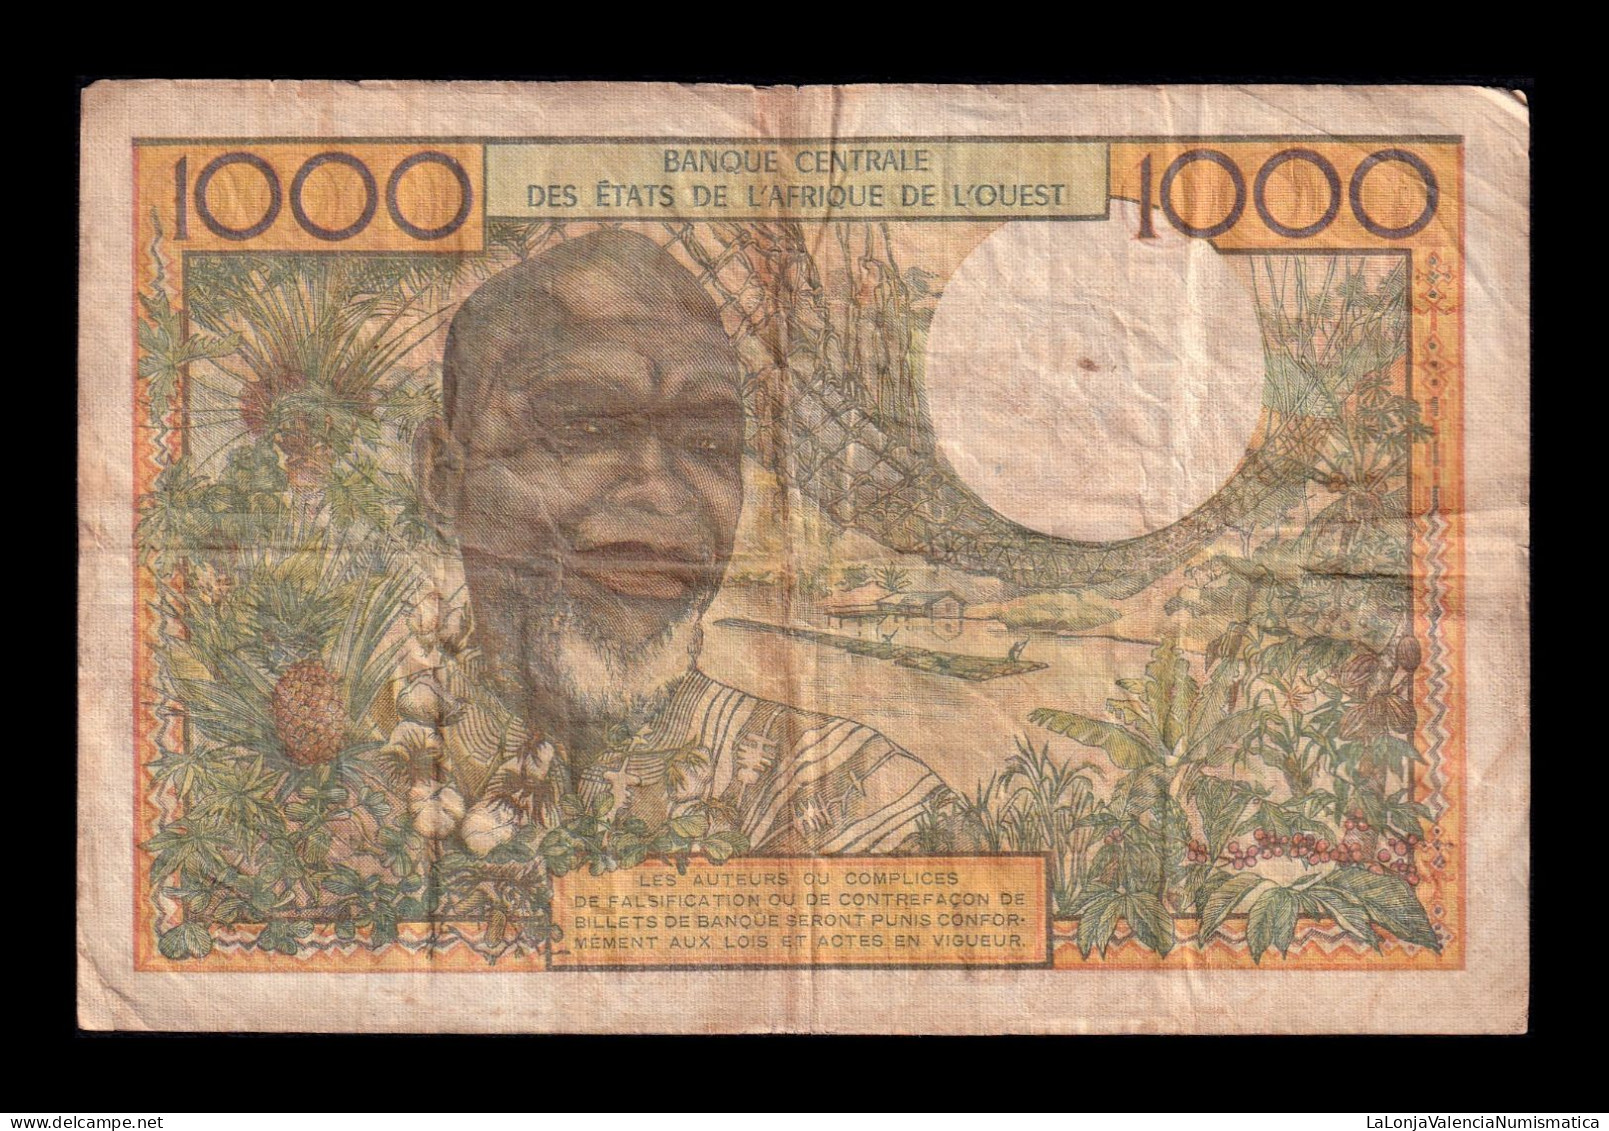 West African St. Benin 1000 Francs ND (1959-1965) Pick 203Bk Bc/Mbc F/Vf - West African States